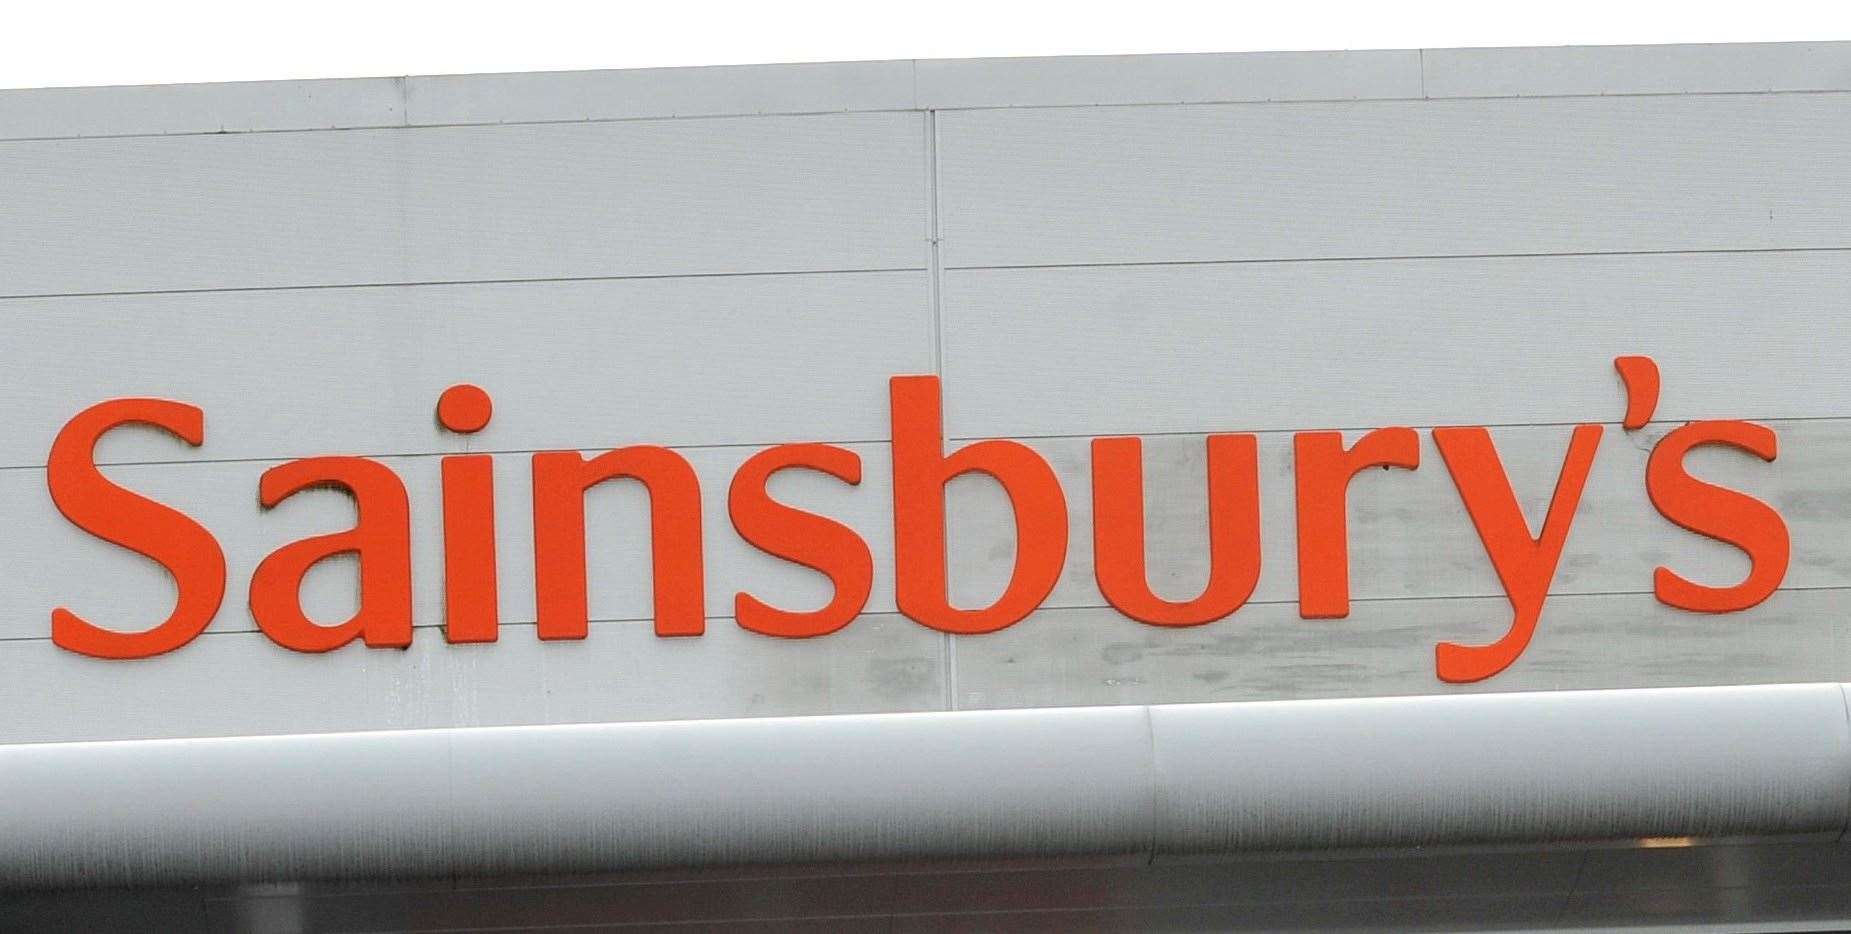 Sainsbury's say the signs were about to be moved as part of an update